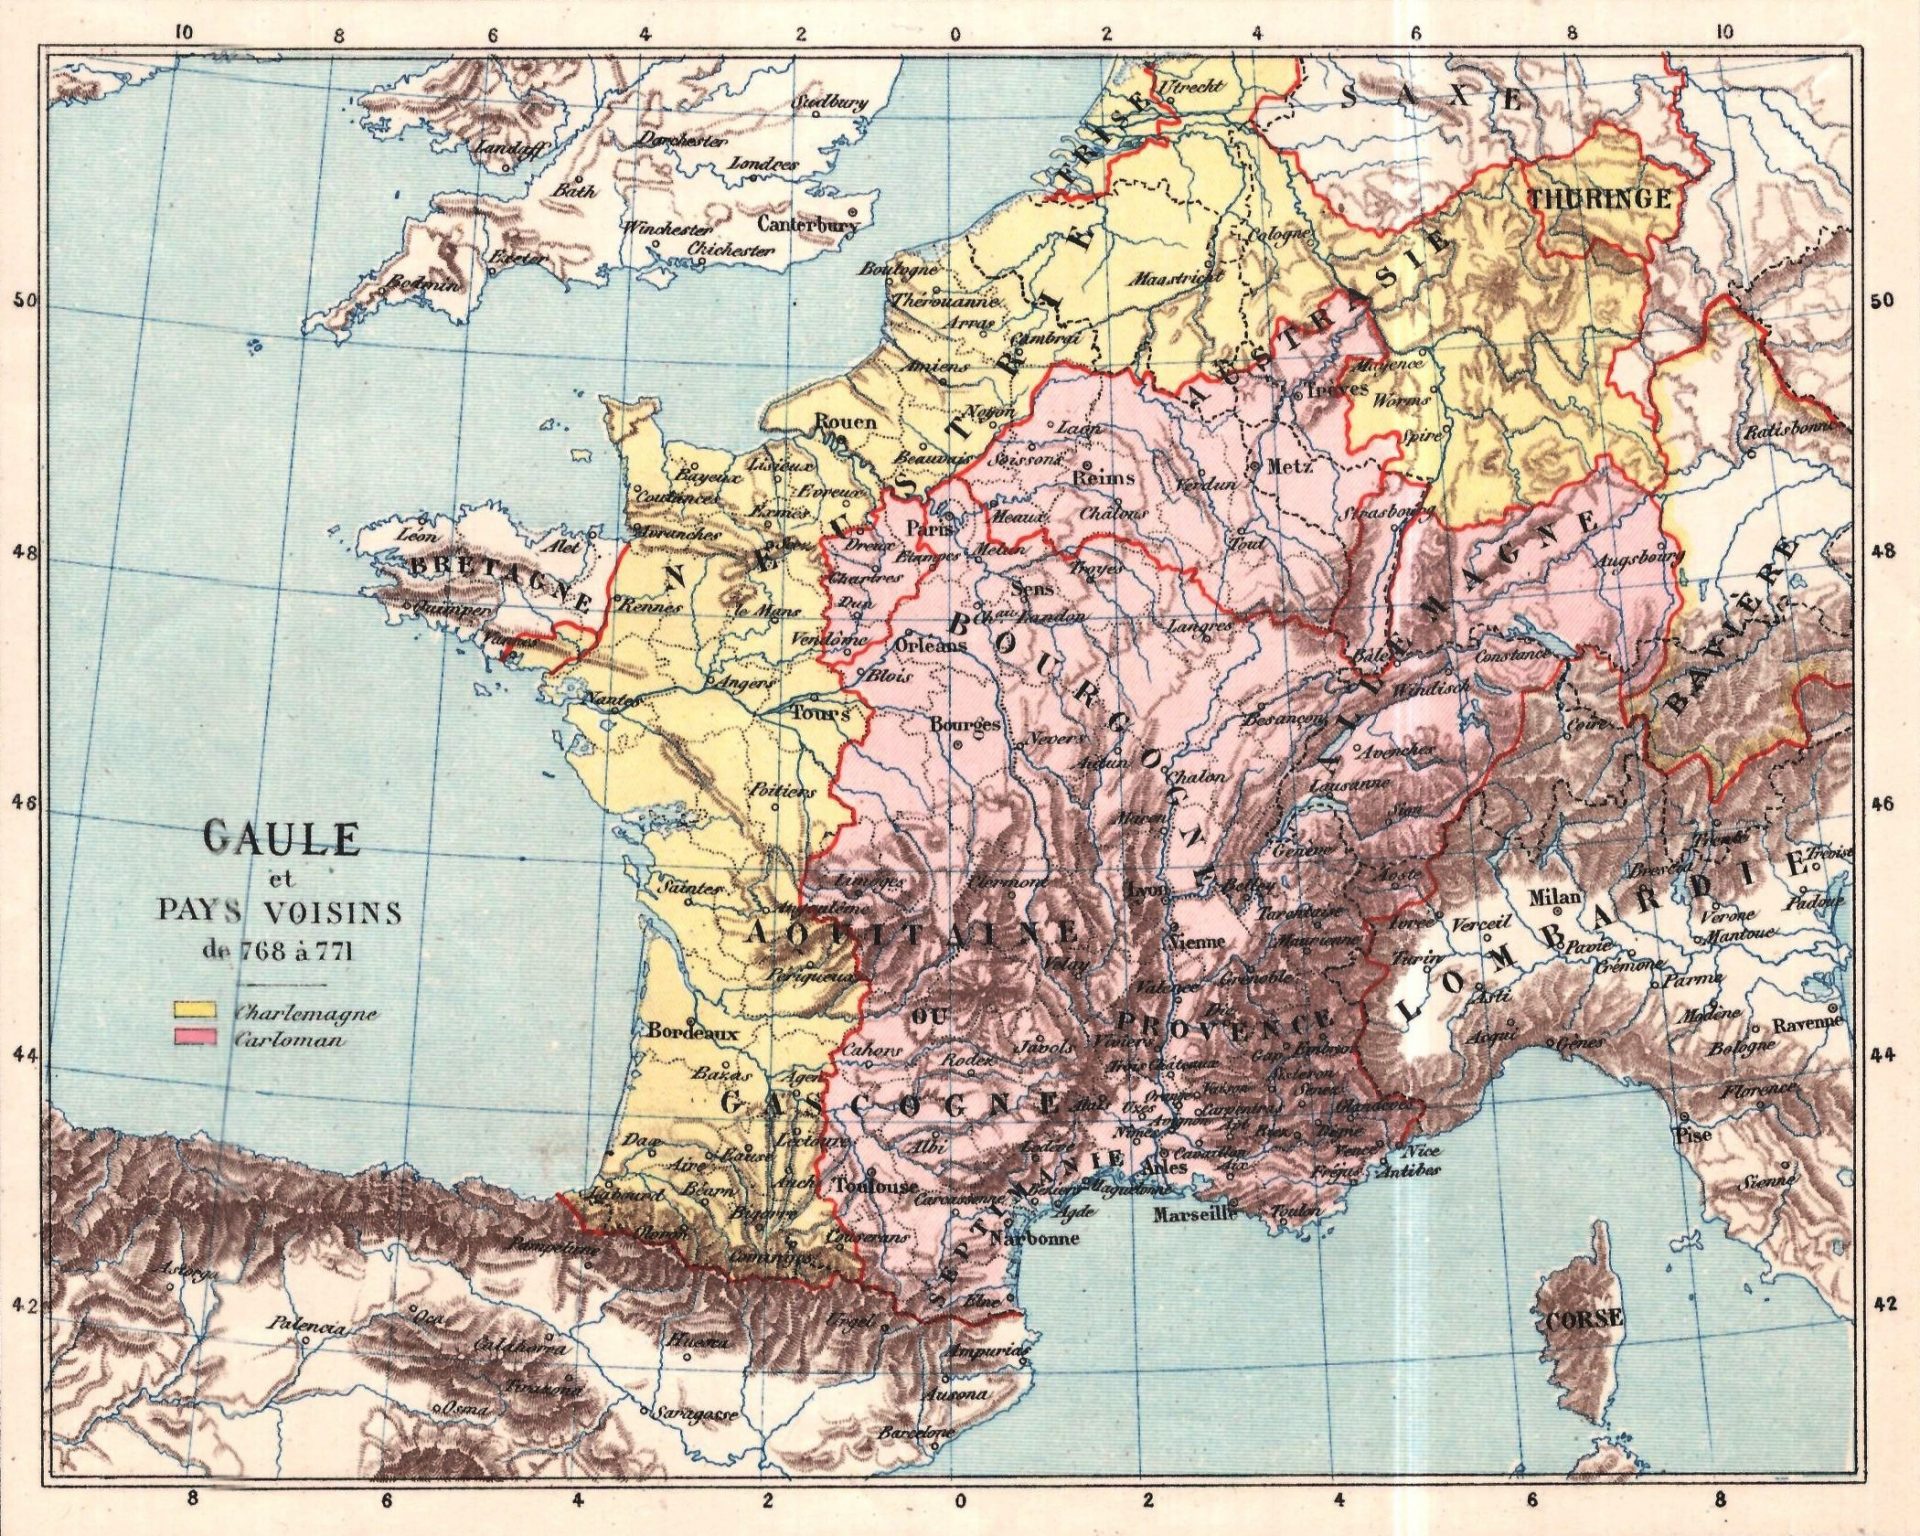 A map showing the division of the Frankish Kingdom from 768 to 771. The map is in French and has a light blue background with longitude and latitude lines. The Frankish Kingdom is divided into two parts by a red line. The northwestern parts of the kingdom (Austrasia, northern Neustria and most of Aquitaine) are yellow and belonged to Charlemagne. The southeastern parts of the country (southern Neustria, Burgundy, Thuringia, Provence, Alsace and Alemannia, Thuringia, and some other areas) in pink, belonged to Carloman. The map also shows the neighboring countries and their borders. The map is detailed and shows the topography of the land, including mountains, rivers, and islands. The map is titled “GAULE PAYS VOISINS” and is dated 768-771.